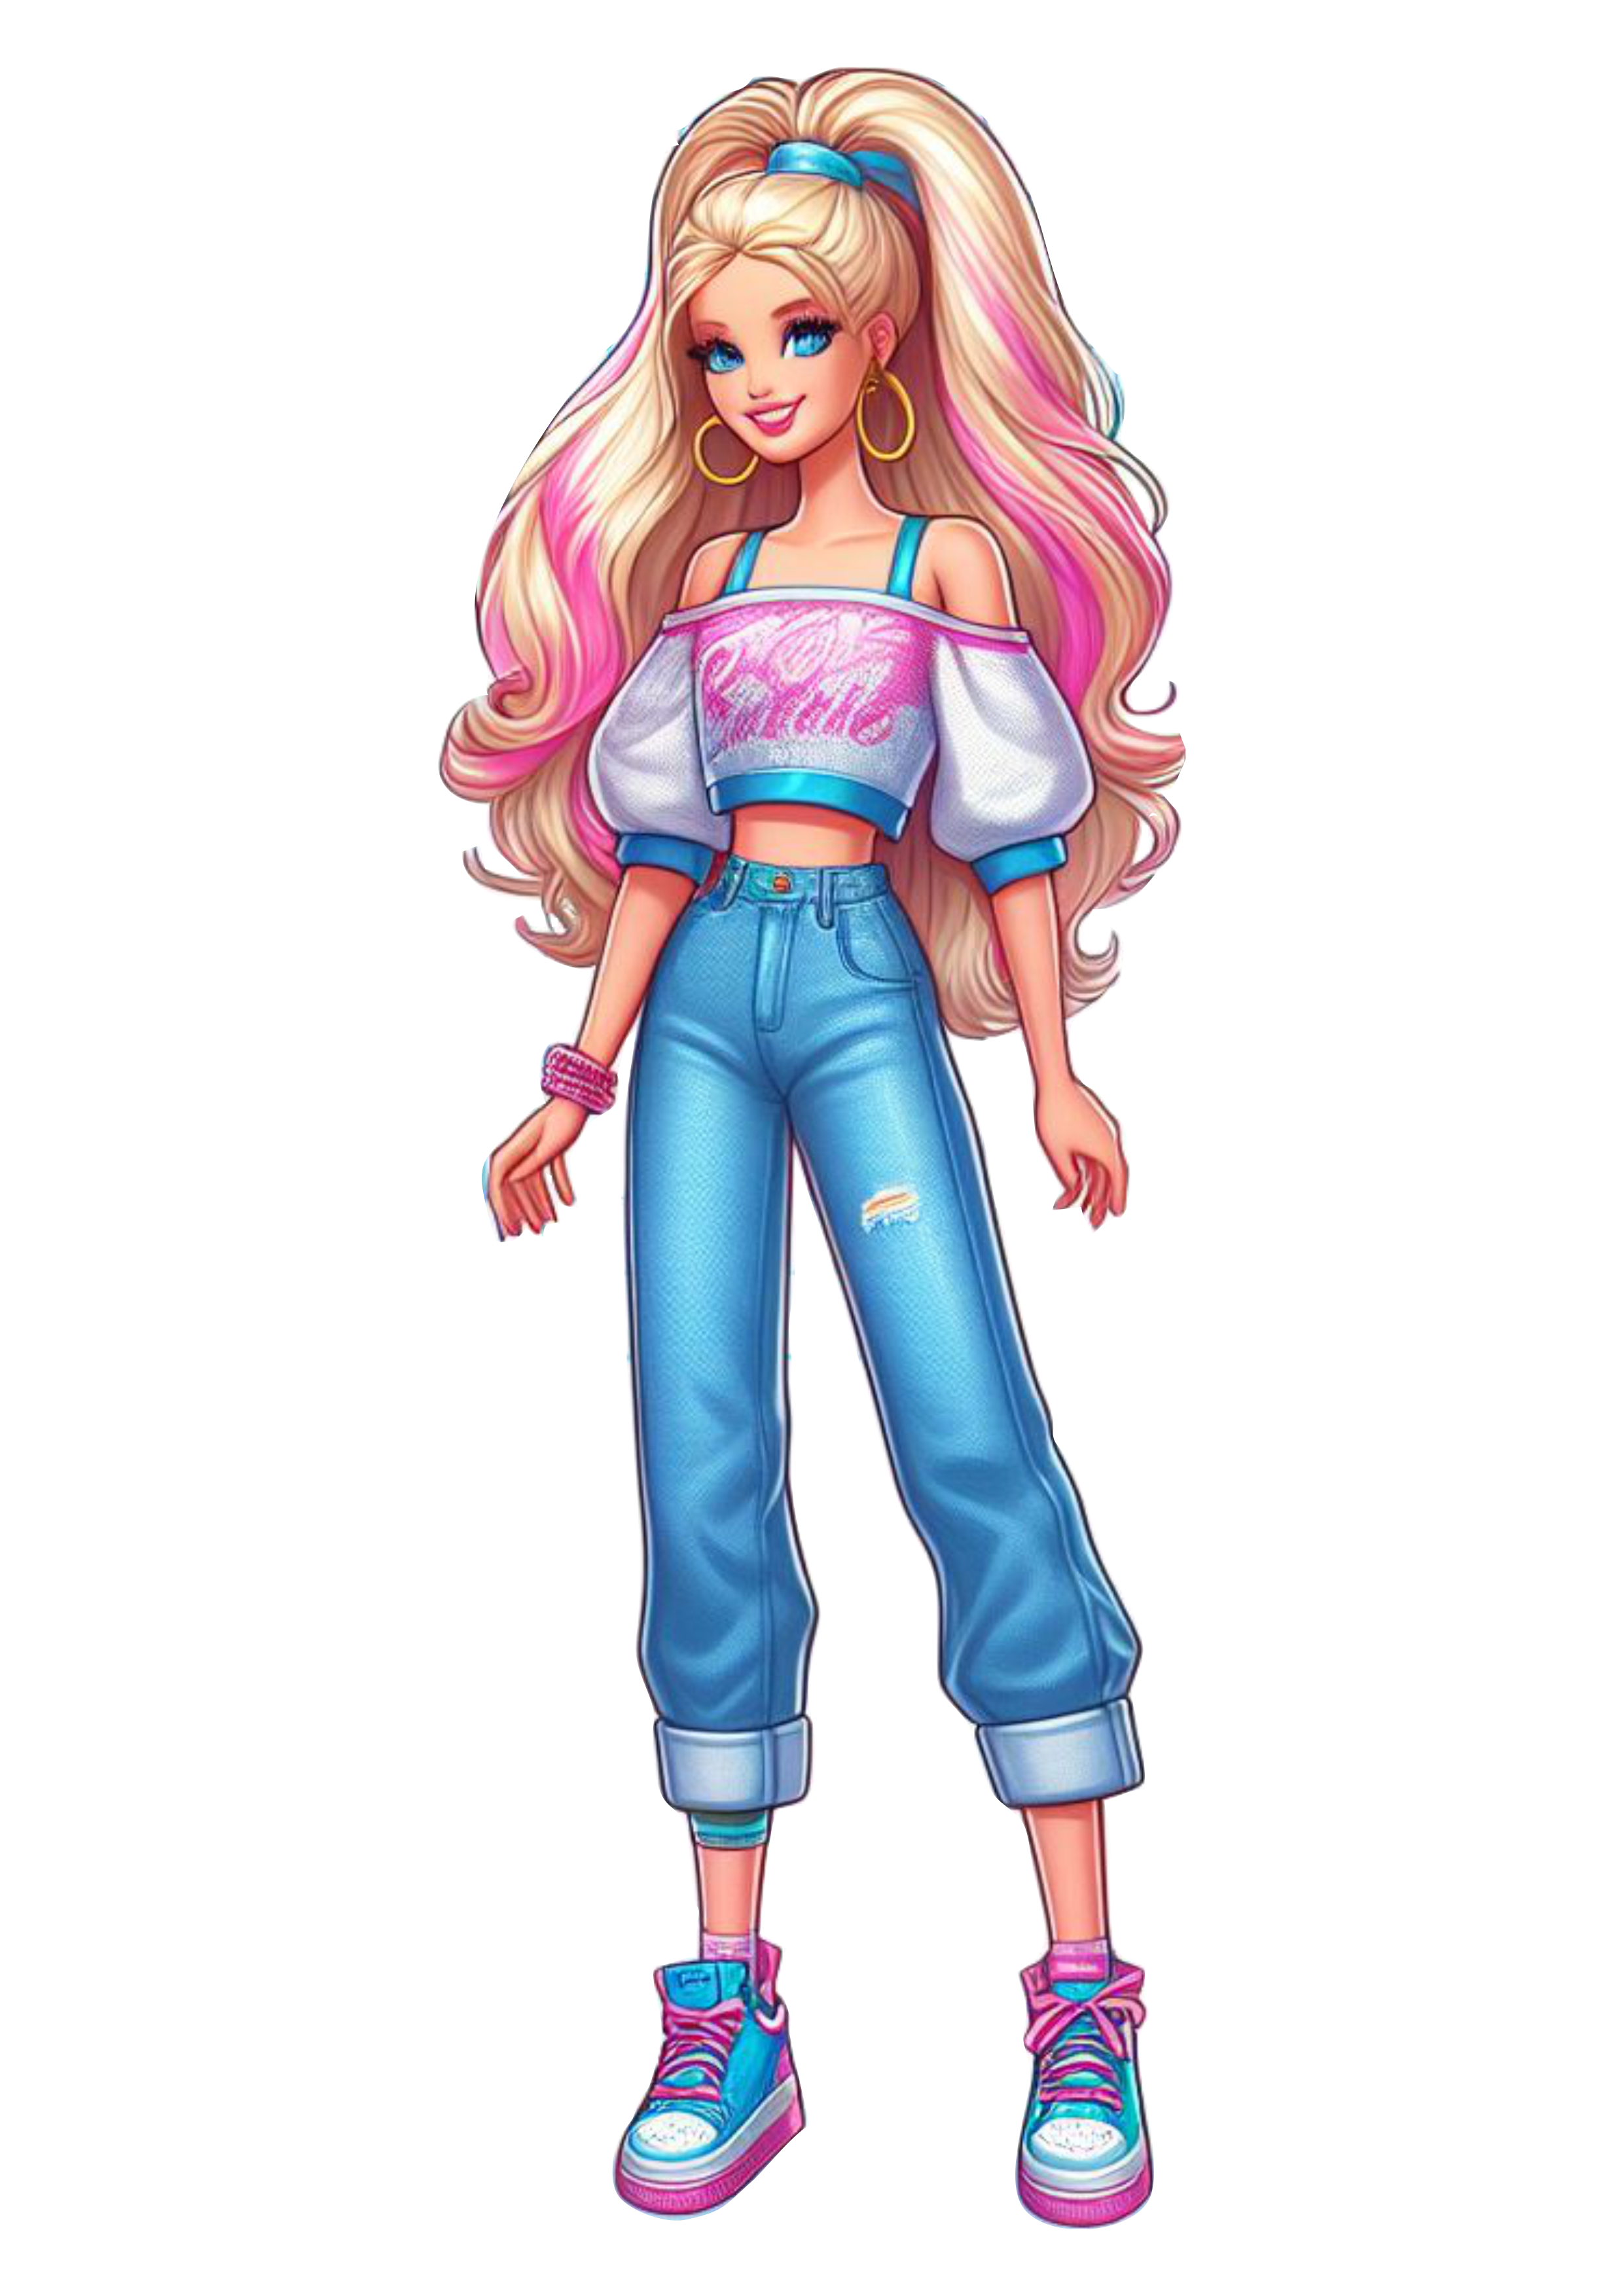 Barbie Schoolgirl Doll Pink Fashion Clothes Toy png images